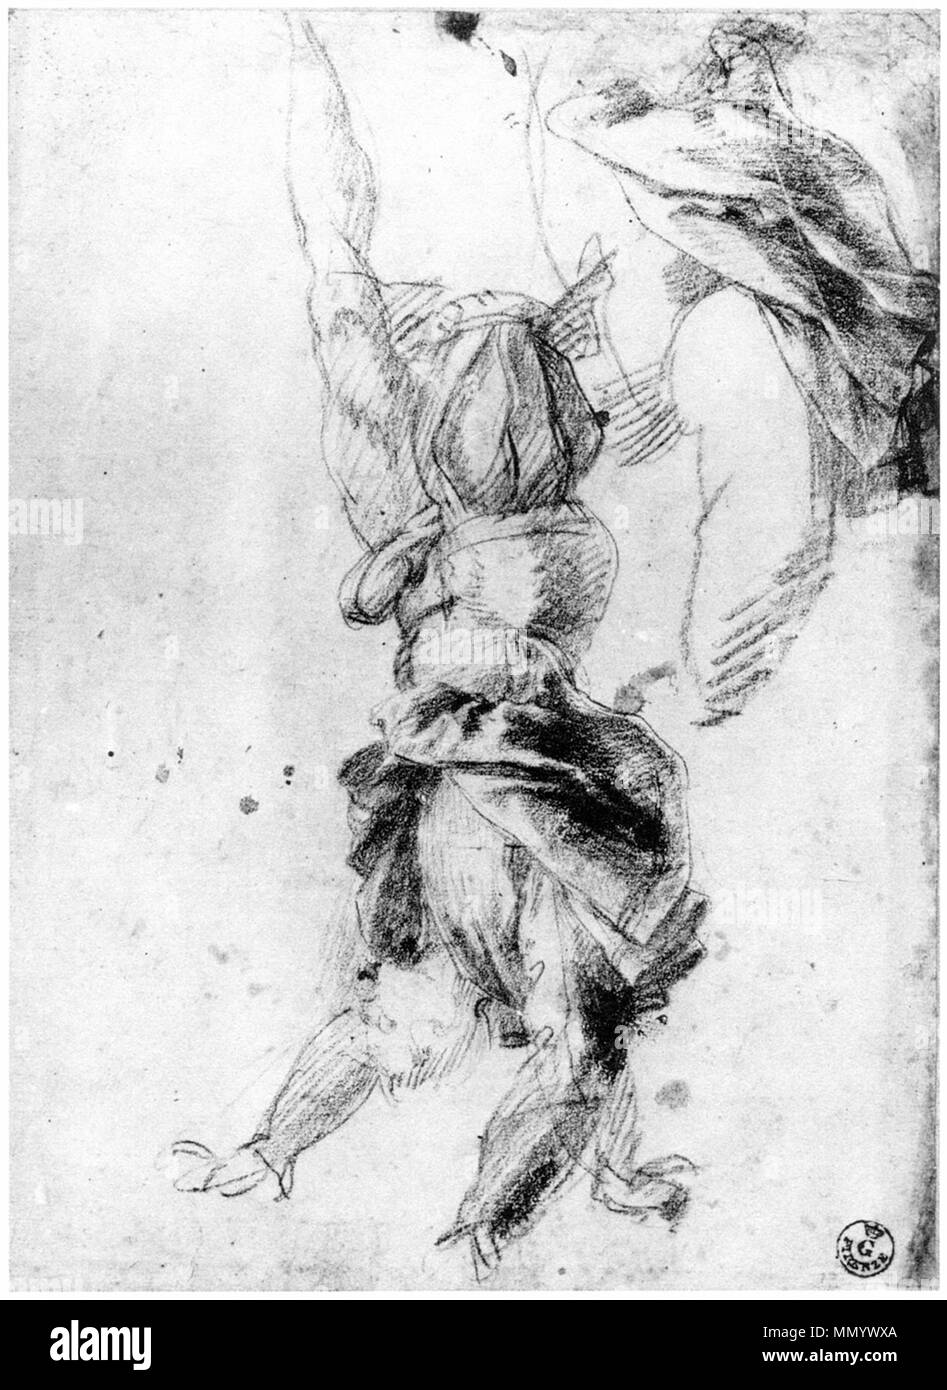 . English: Drawing, in red chalk on white paper, of a man hanged by one foot. This was a preparatory sketch for a pittura infamante or shame painting. It is located in the Galleria degli Uffizi, Florence, Italy. Hanging by one foot was a method of execution, prolonged and particularly degrading. In Germany it was usually associated with Jews and called the 'Jewish Execution', while in Italy it was usually associated with traitors. Shame paintings, depicting such hanging in effigy, were common in some parts of Italy, including Florence. Andrea del Sarto drew seven such images which have survive Stock Photo